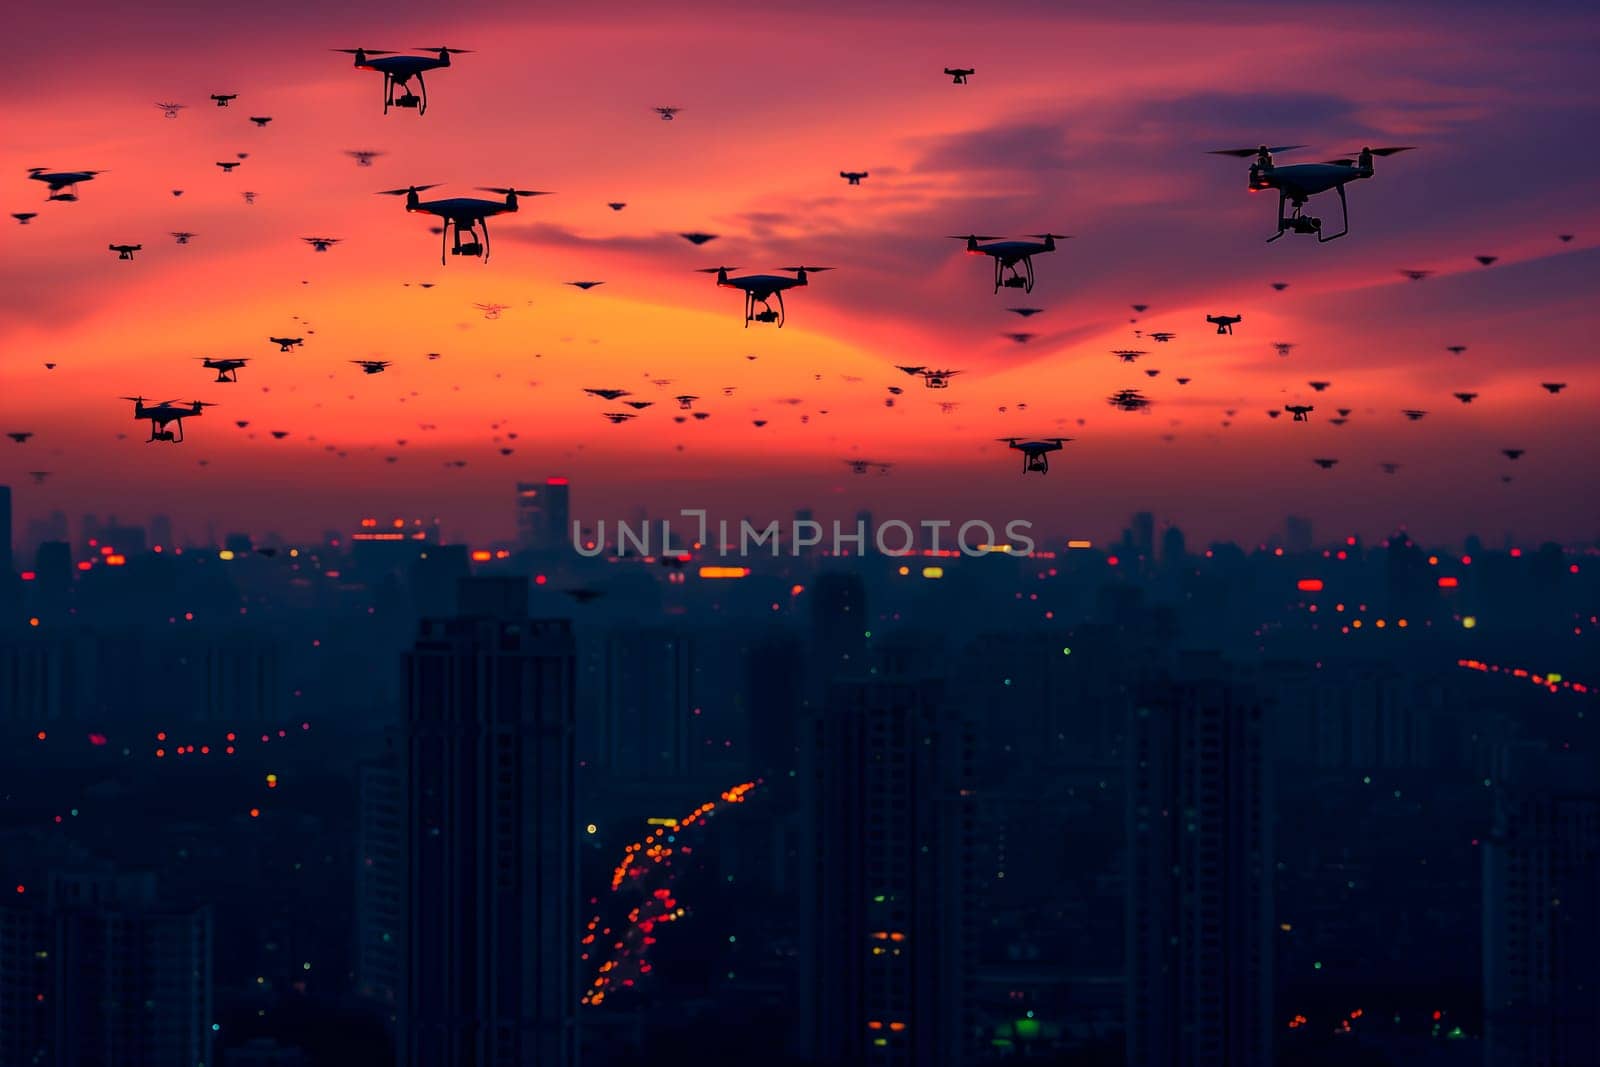 Group of drones over city at summer morning or evening. Neural network generated image. Not based on any actual scene or pattern.